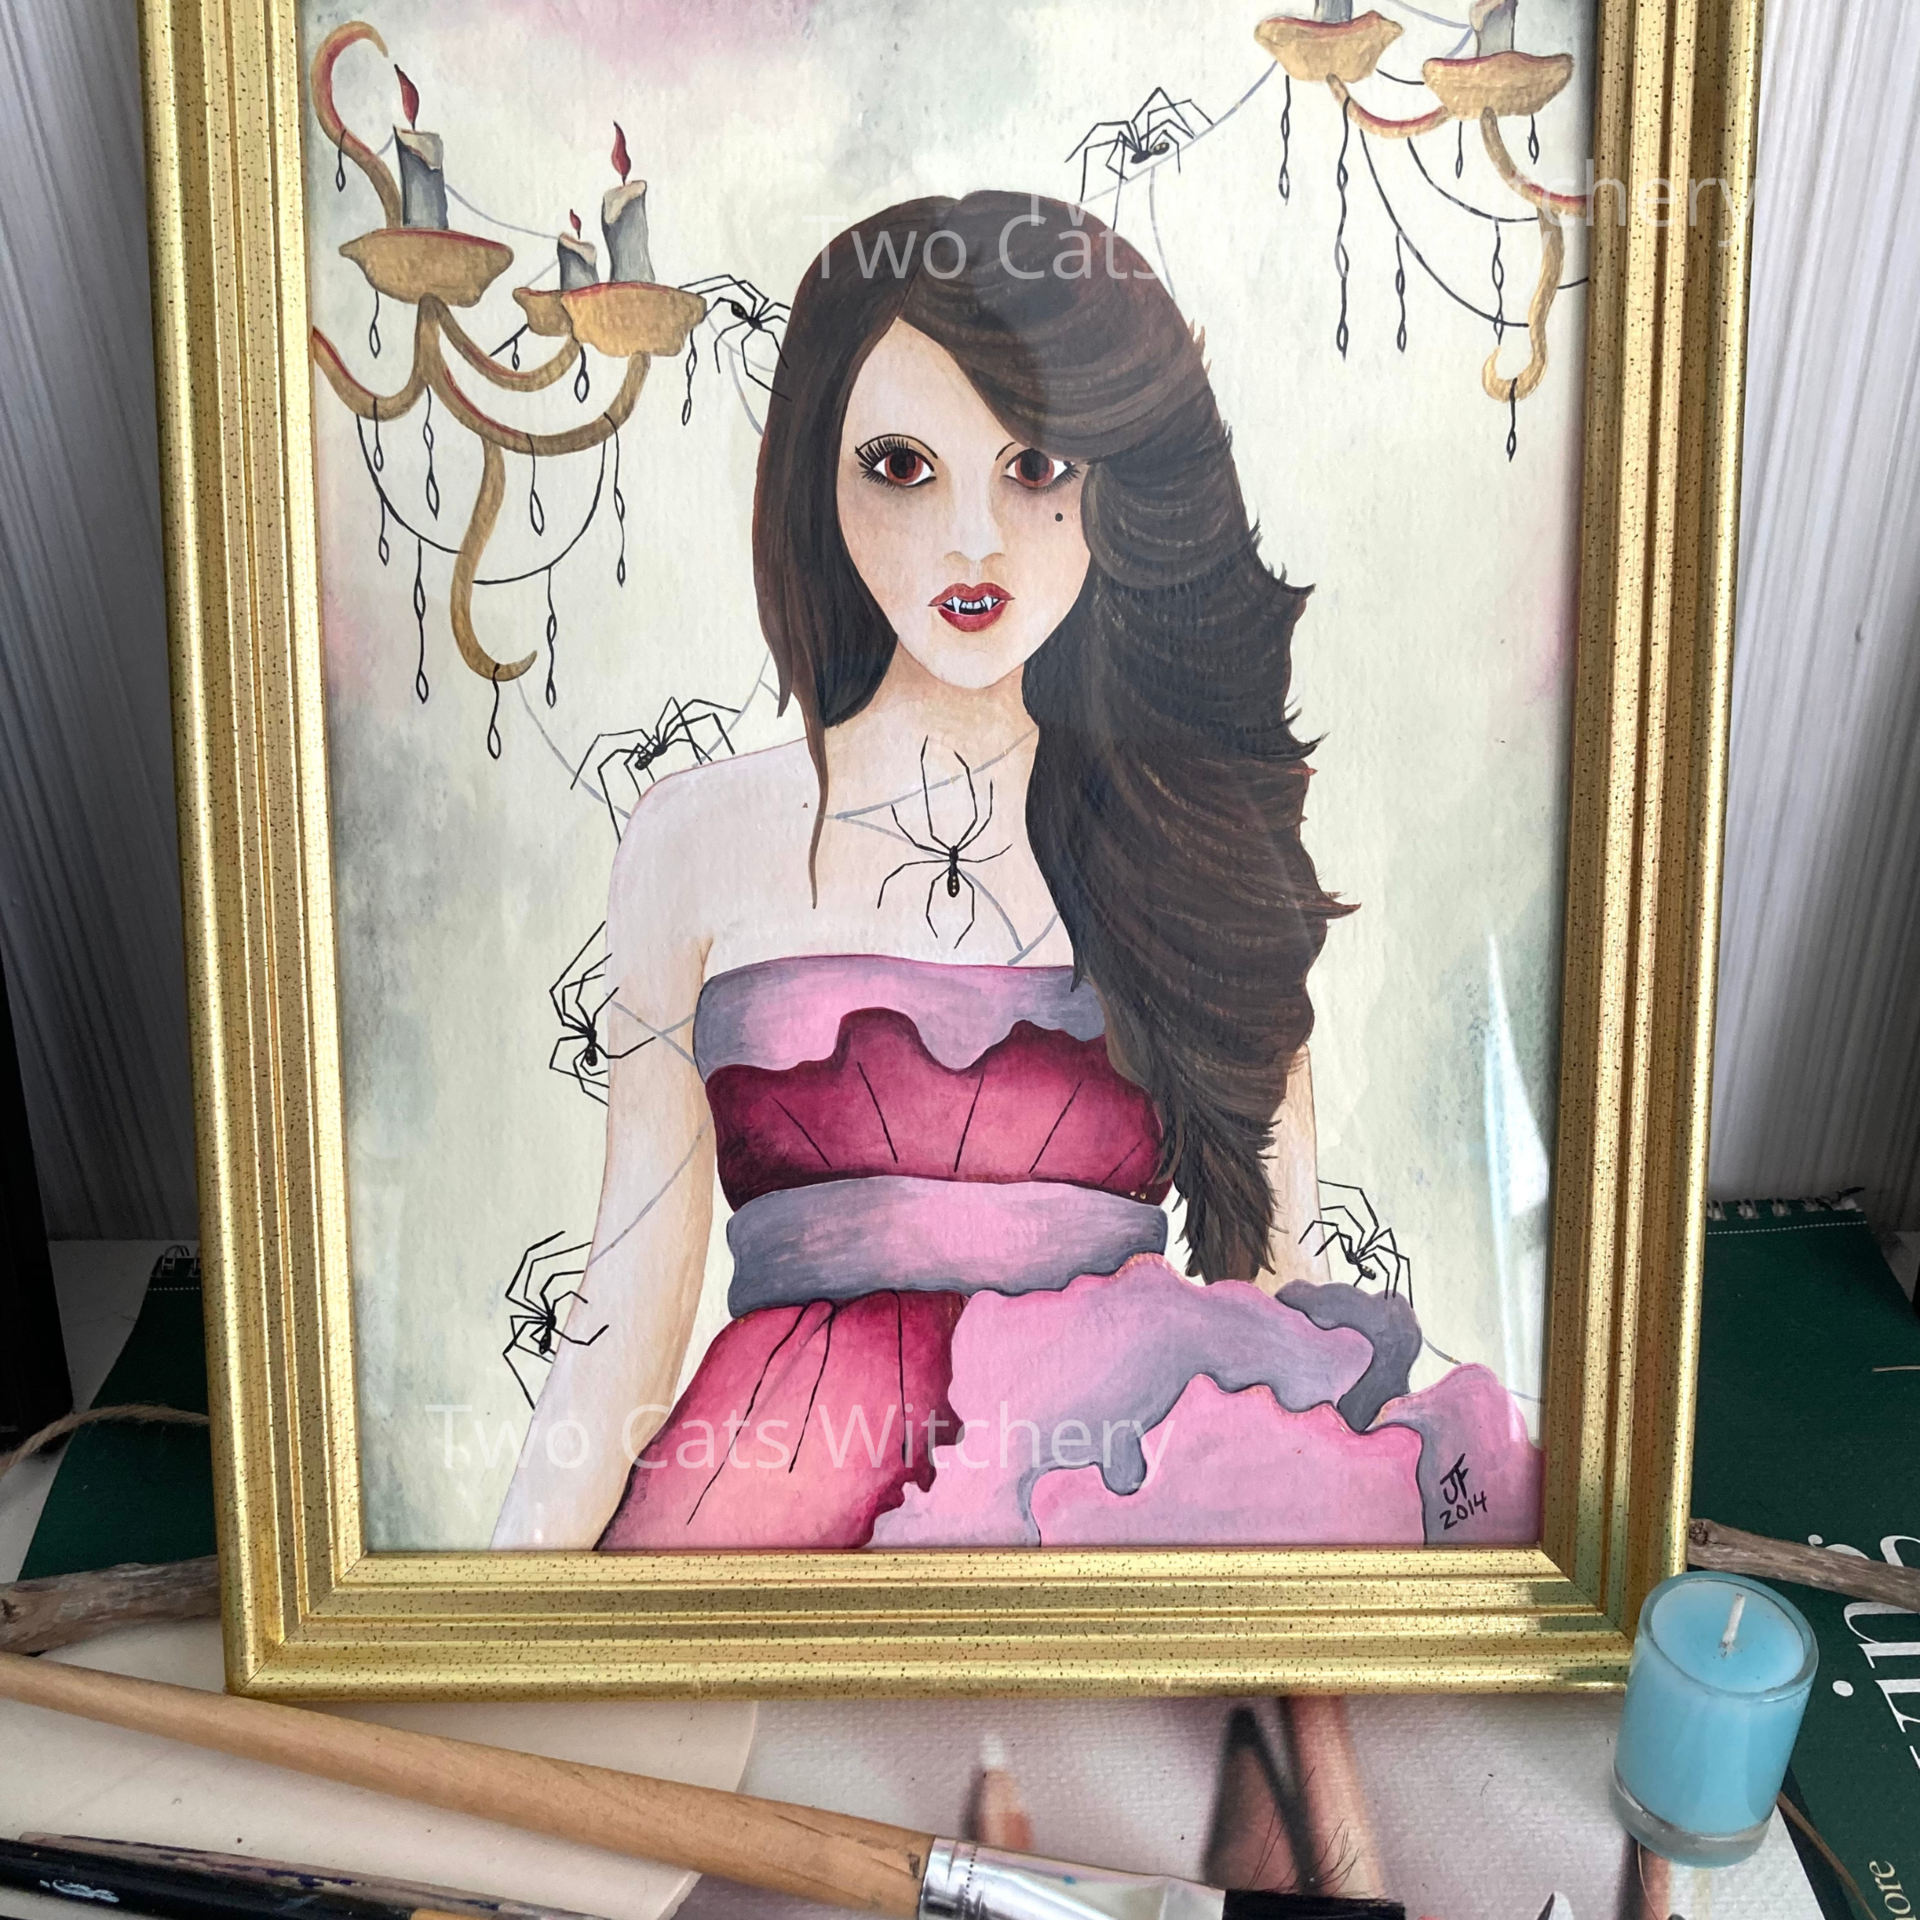 Vampire Original Painting with Black Widow Spiders. Acrylic Paint with a Vintage Golden Frame, Titled The Widow Maker